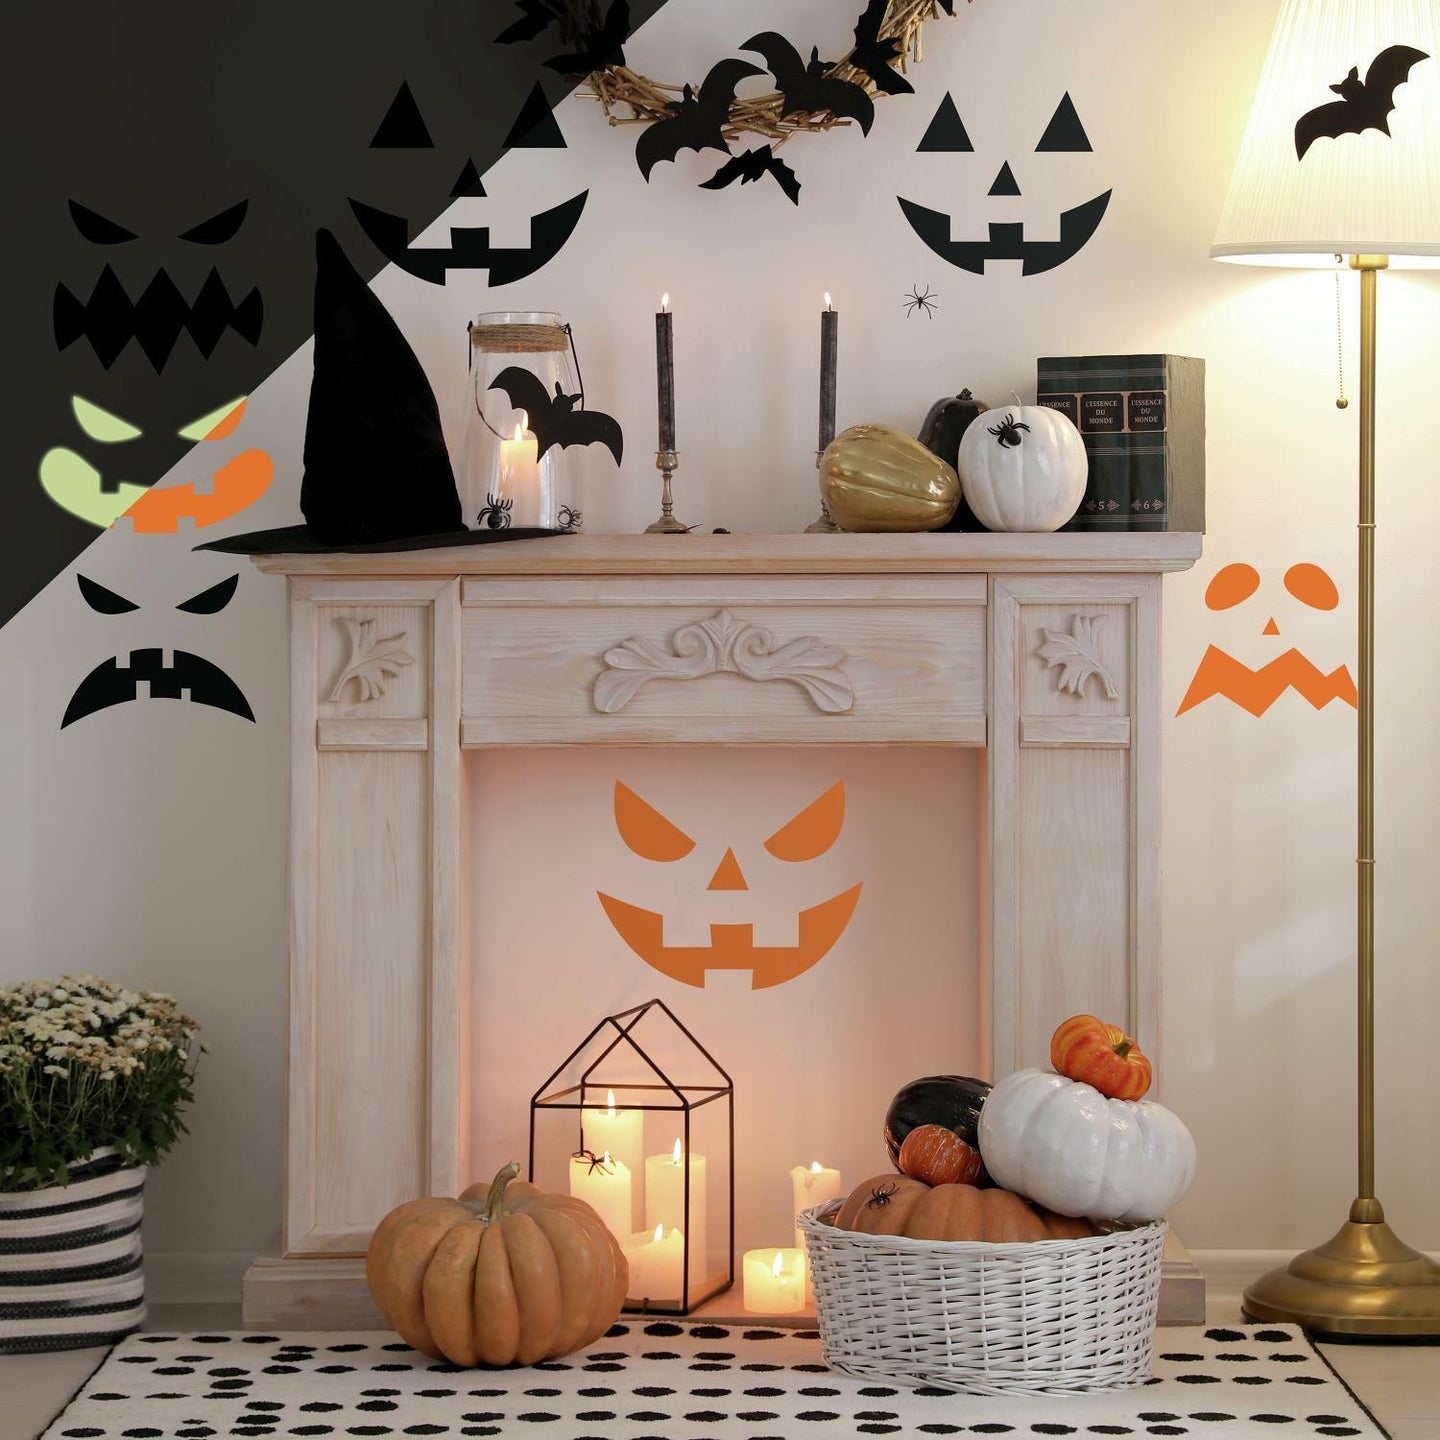 HALLOWEEN PUMPKIN FACES GLOW IN THE DARK PEEL AND STICK WALL DECALS